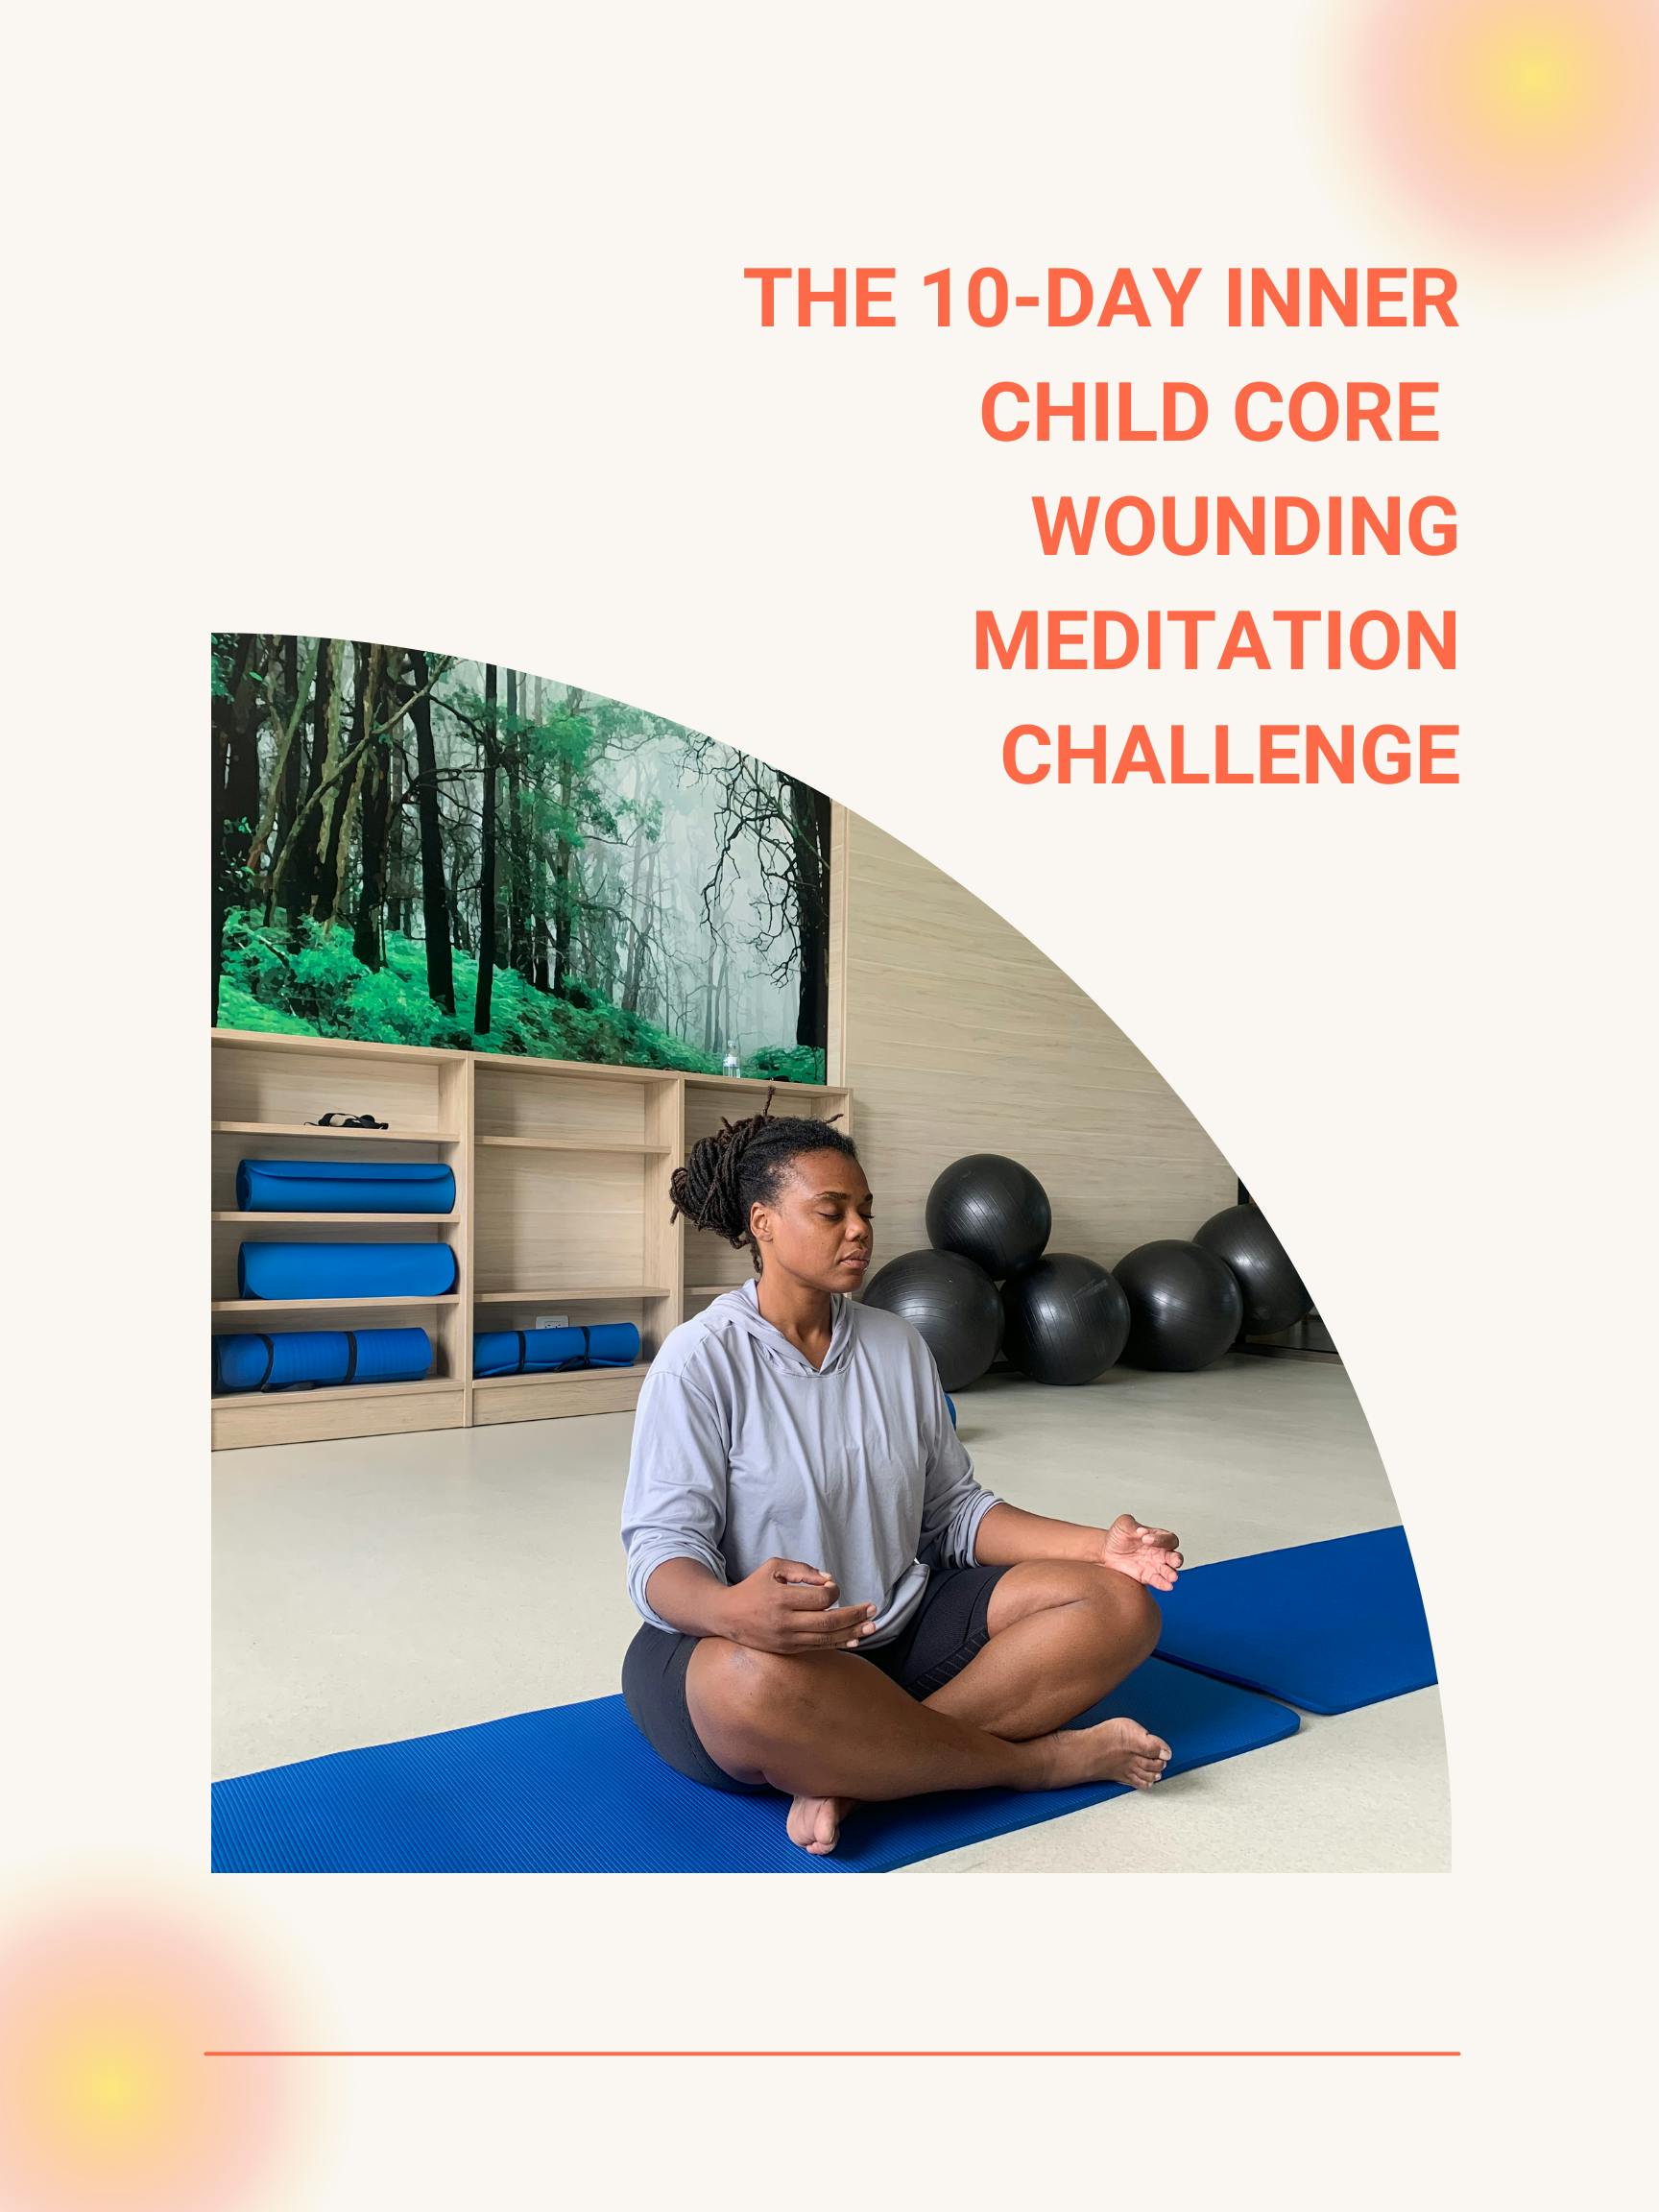 The 10-Day Inner Child Core Wounding Meditation Challenge